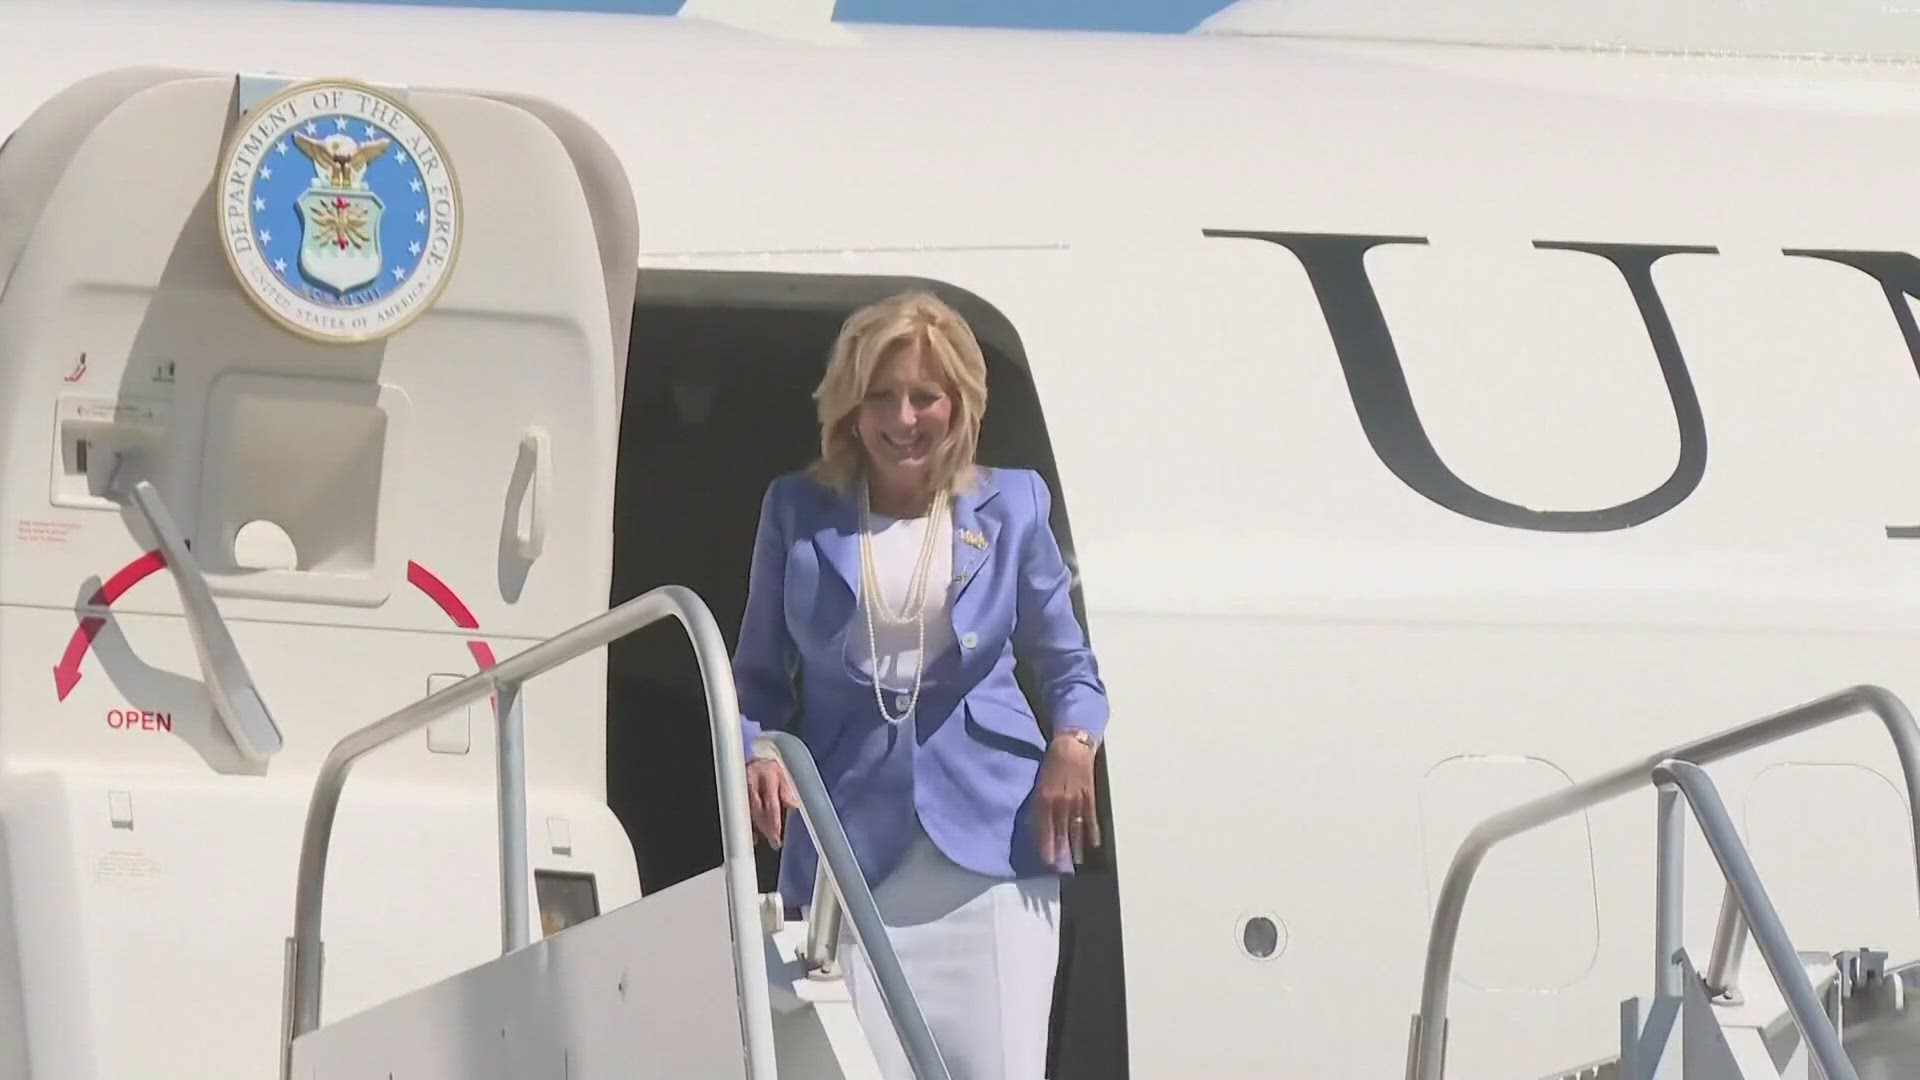 First Lady Jill Biden will arrive in Denver on Friday night and participate an event at the University of Colorado Anschutz Medical Campus in Aurora on Saturday.